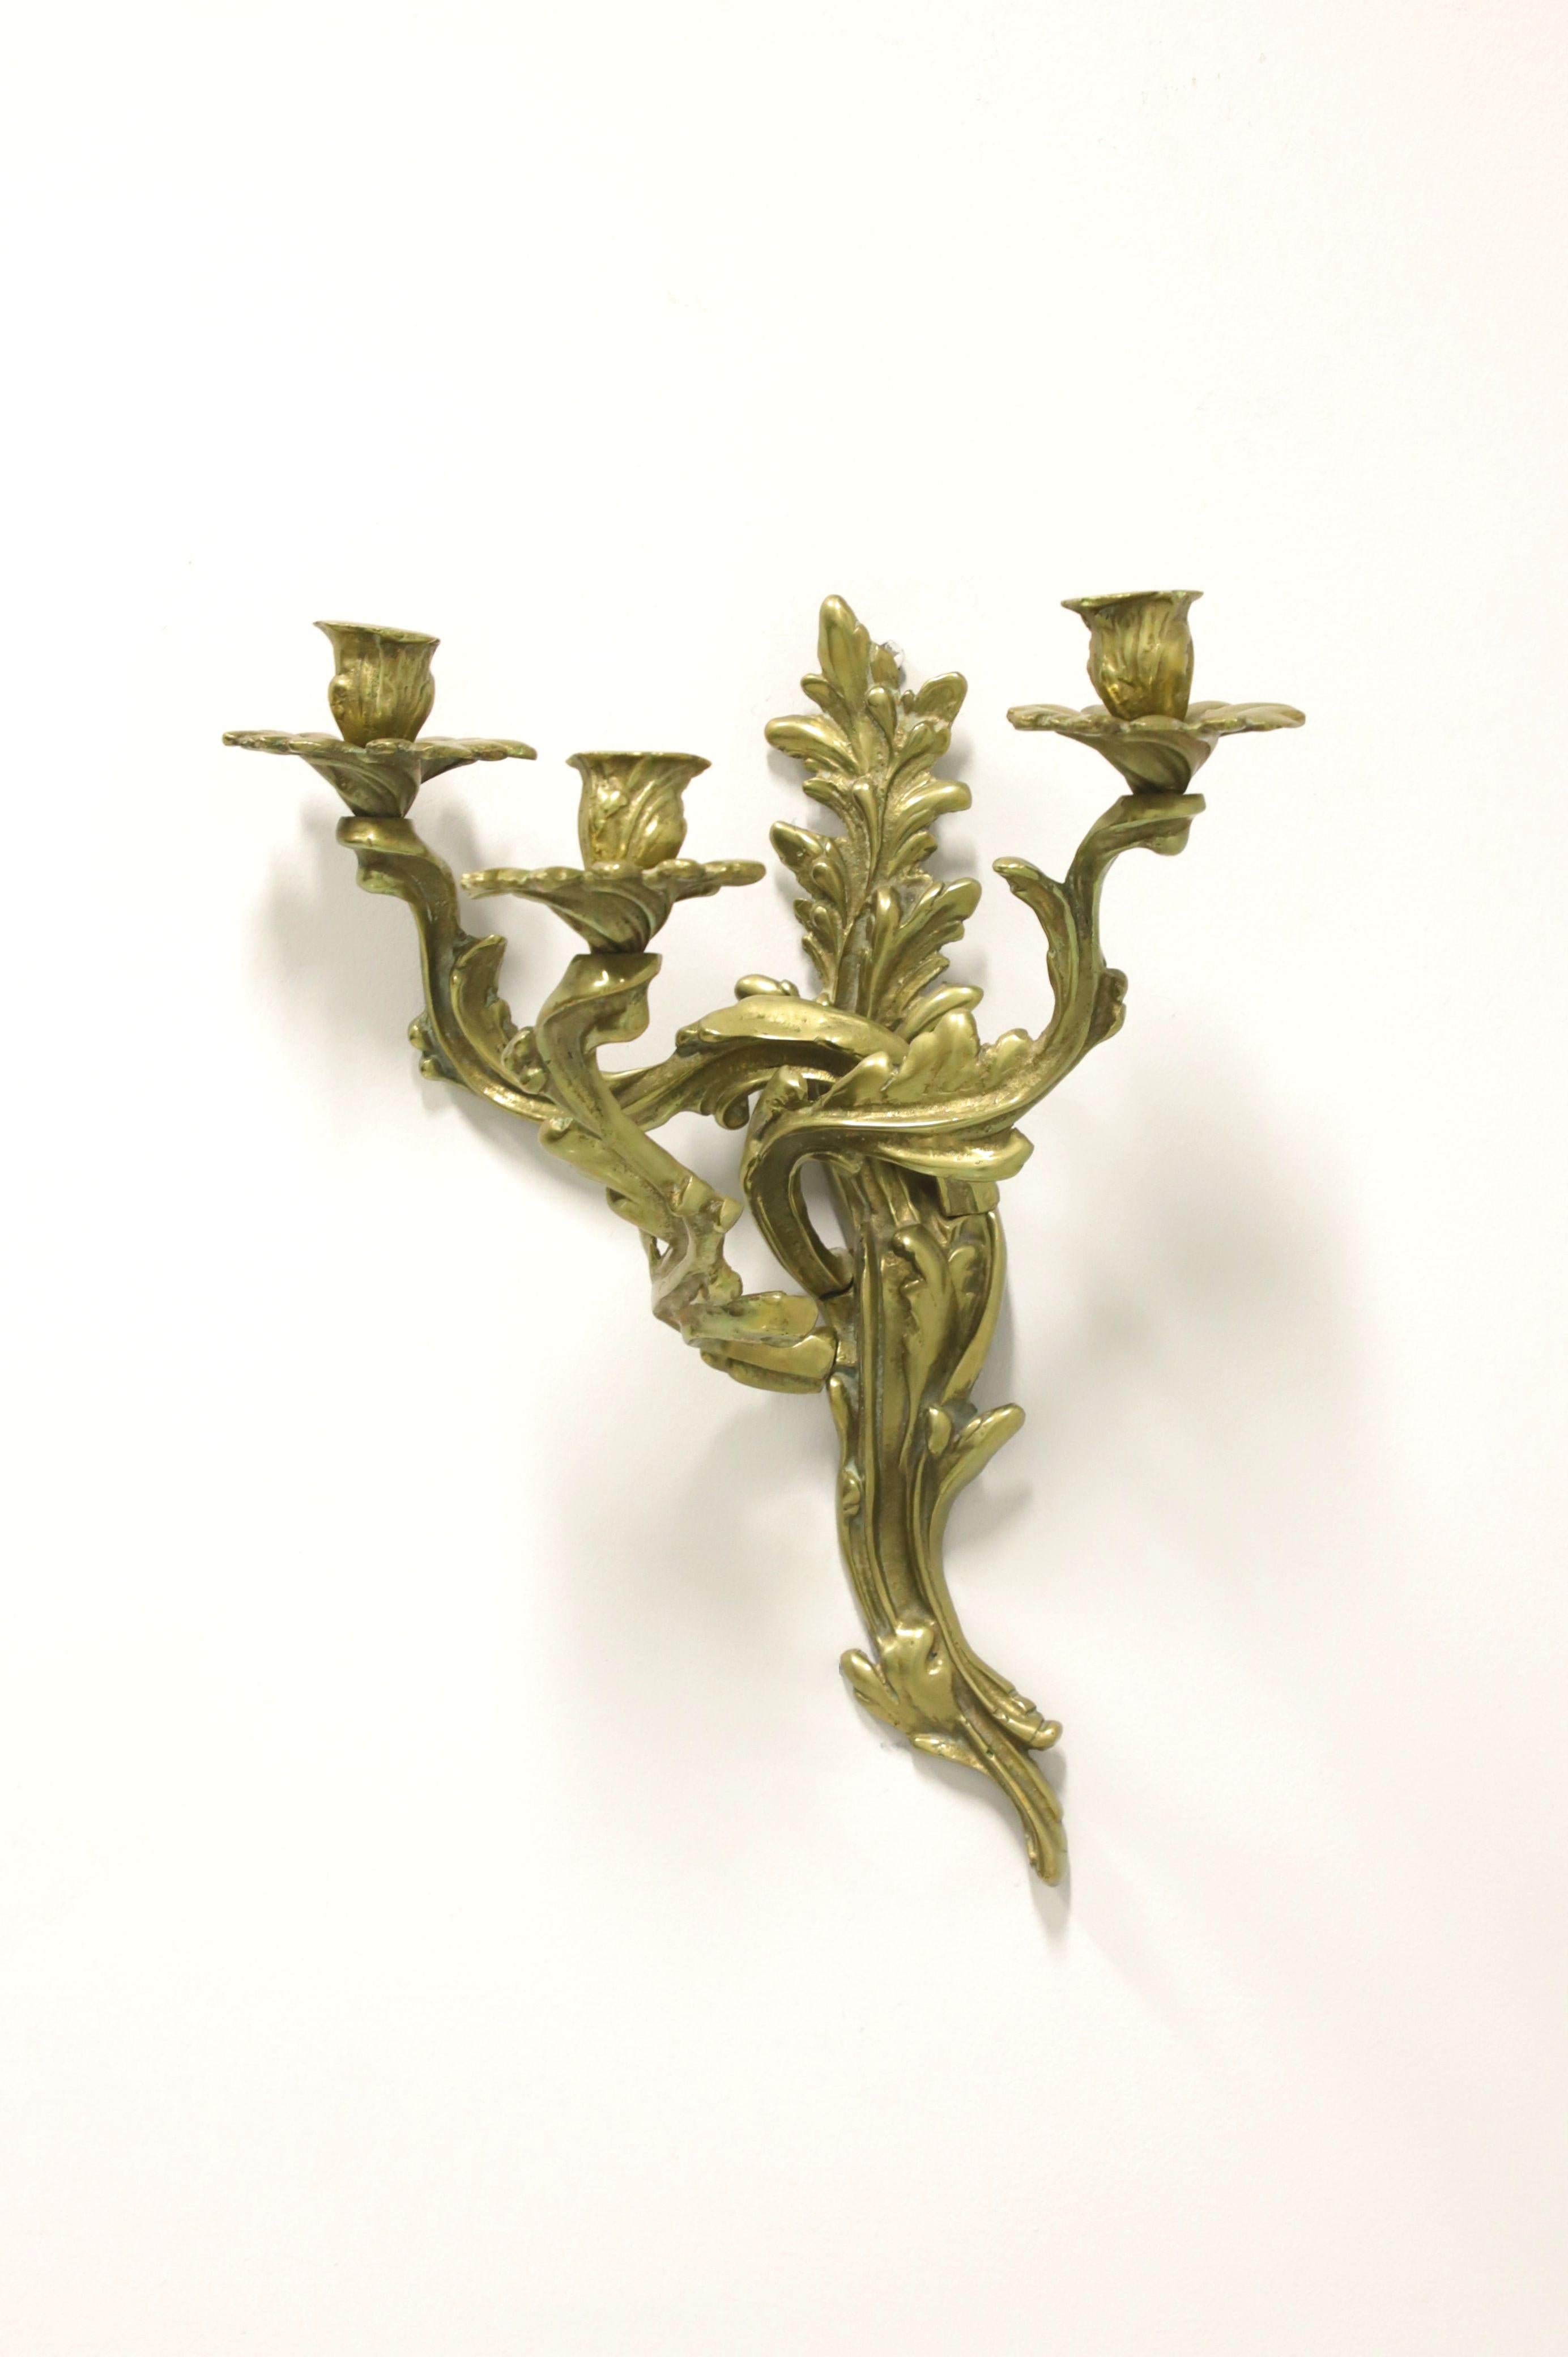 An antique Rococo style candle wall sconce, unbranded. Solid brass decoratively sculpted in a leaves & branches form, with three arms and candleholders. Possibly made in the USA, circa 1920's.

Measures: 13 W 9 D 15.5 H, Weighs Approximately: 6 lbs